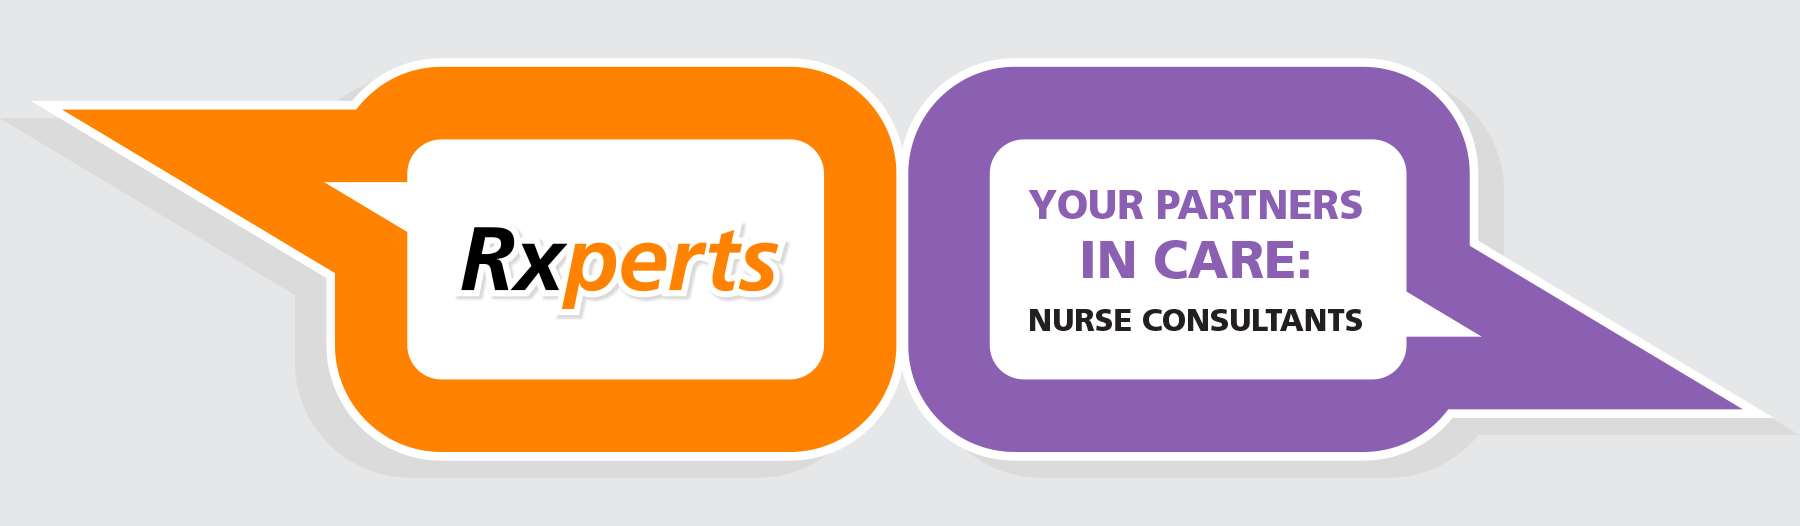 Rxperts and nurse consultants graphic